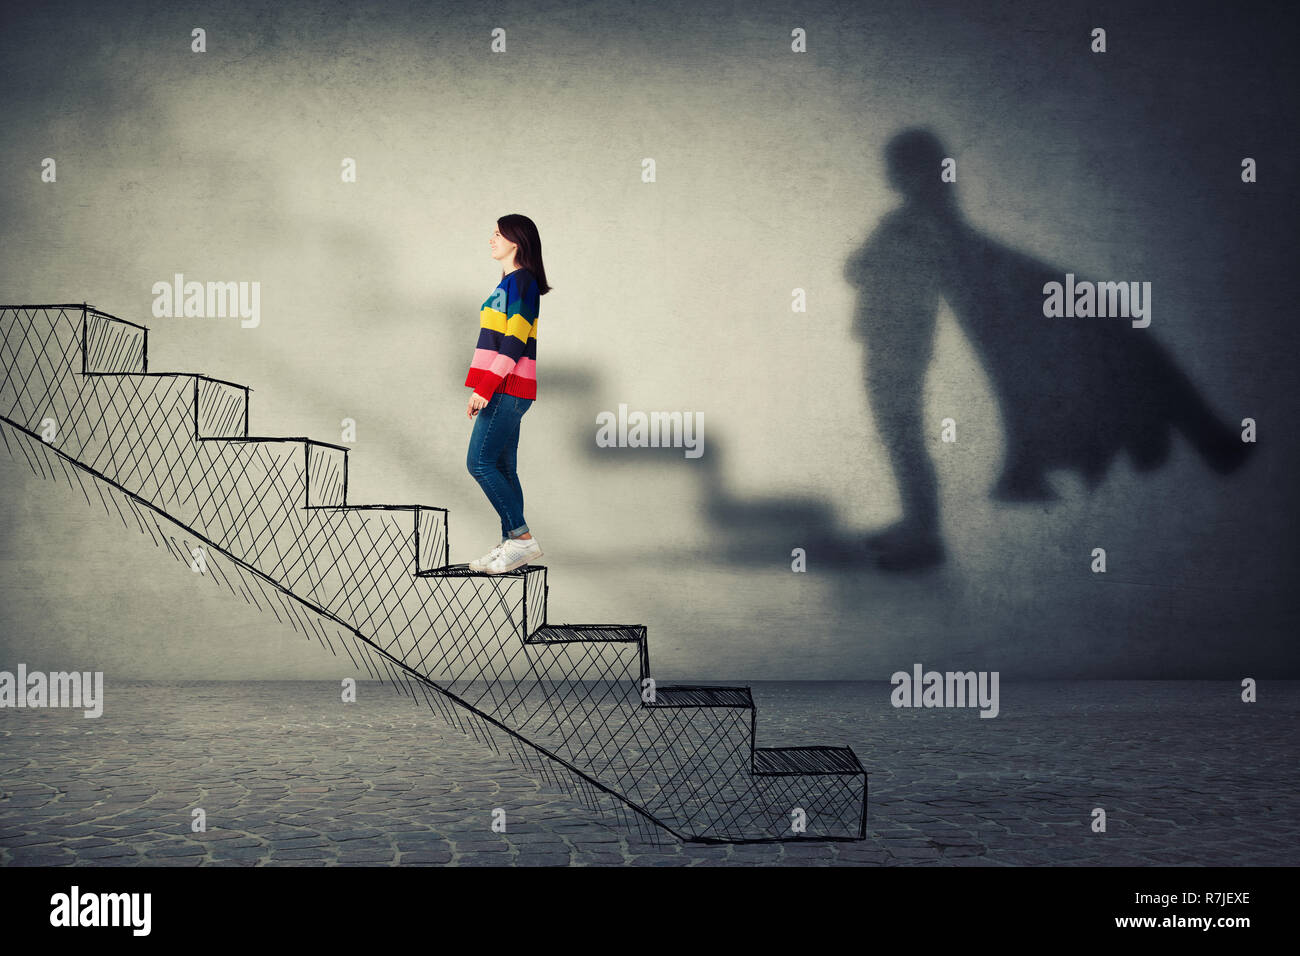 Happy young woman climbing a imaginative stairway with aspiration of becoming superhero. Dream of success, inner power and confidence symbol. Stock Photo